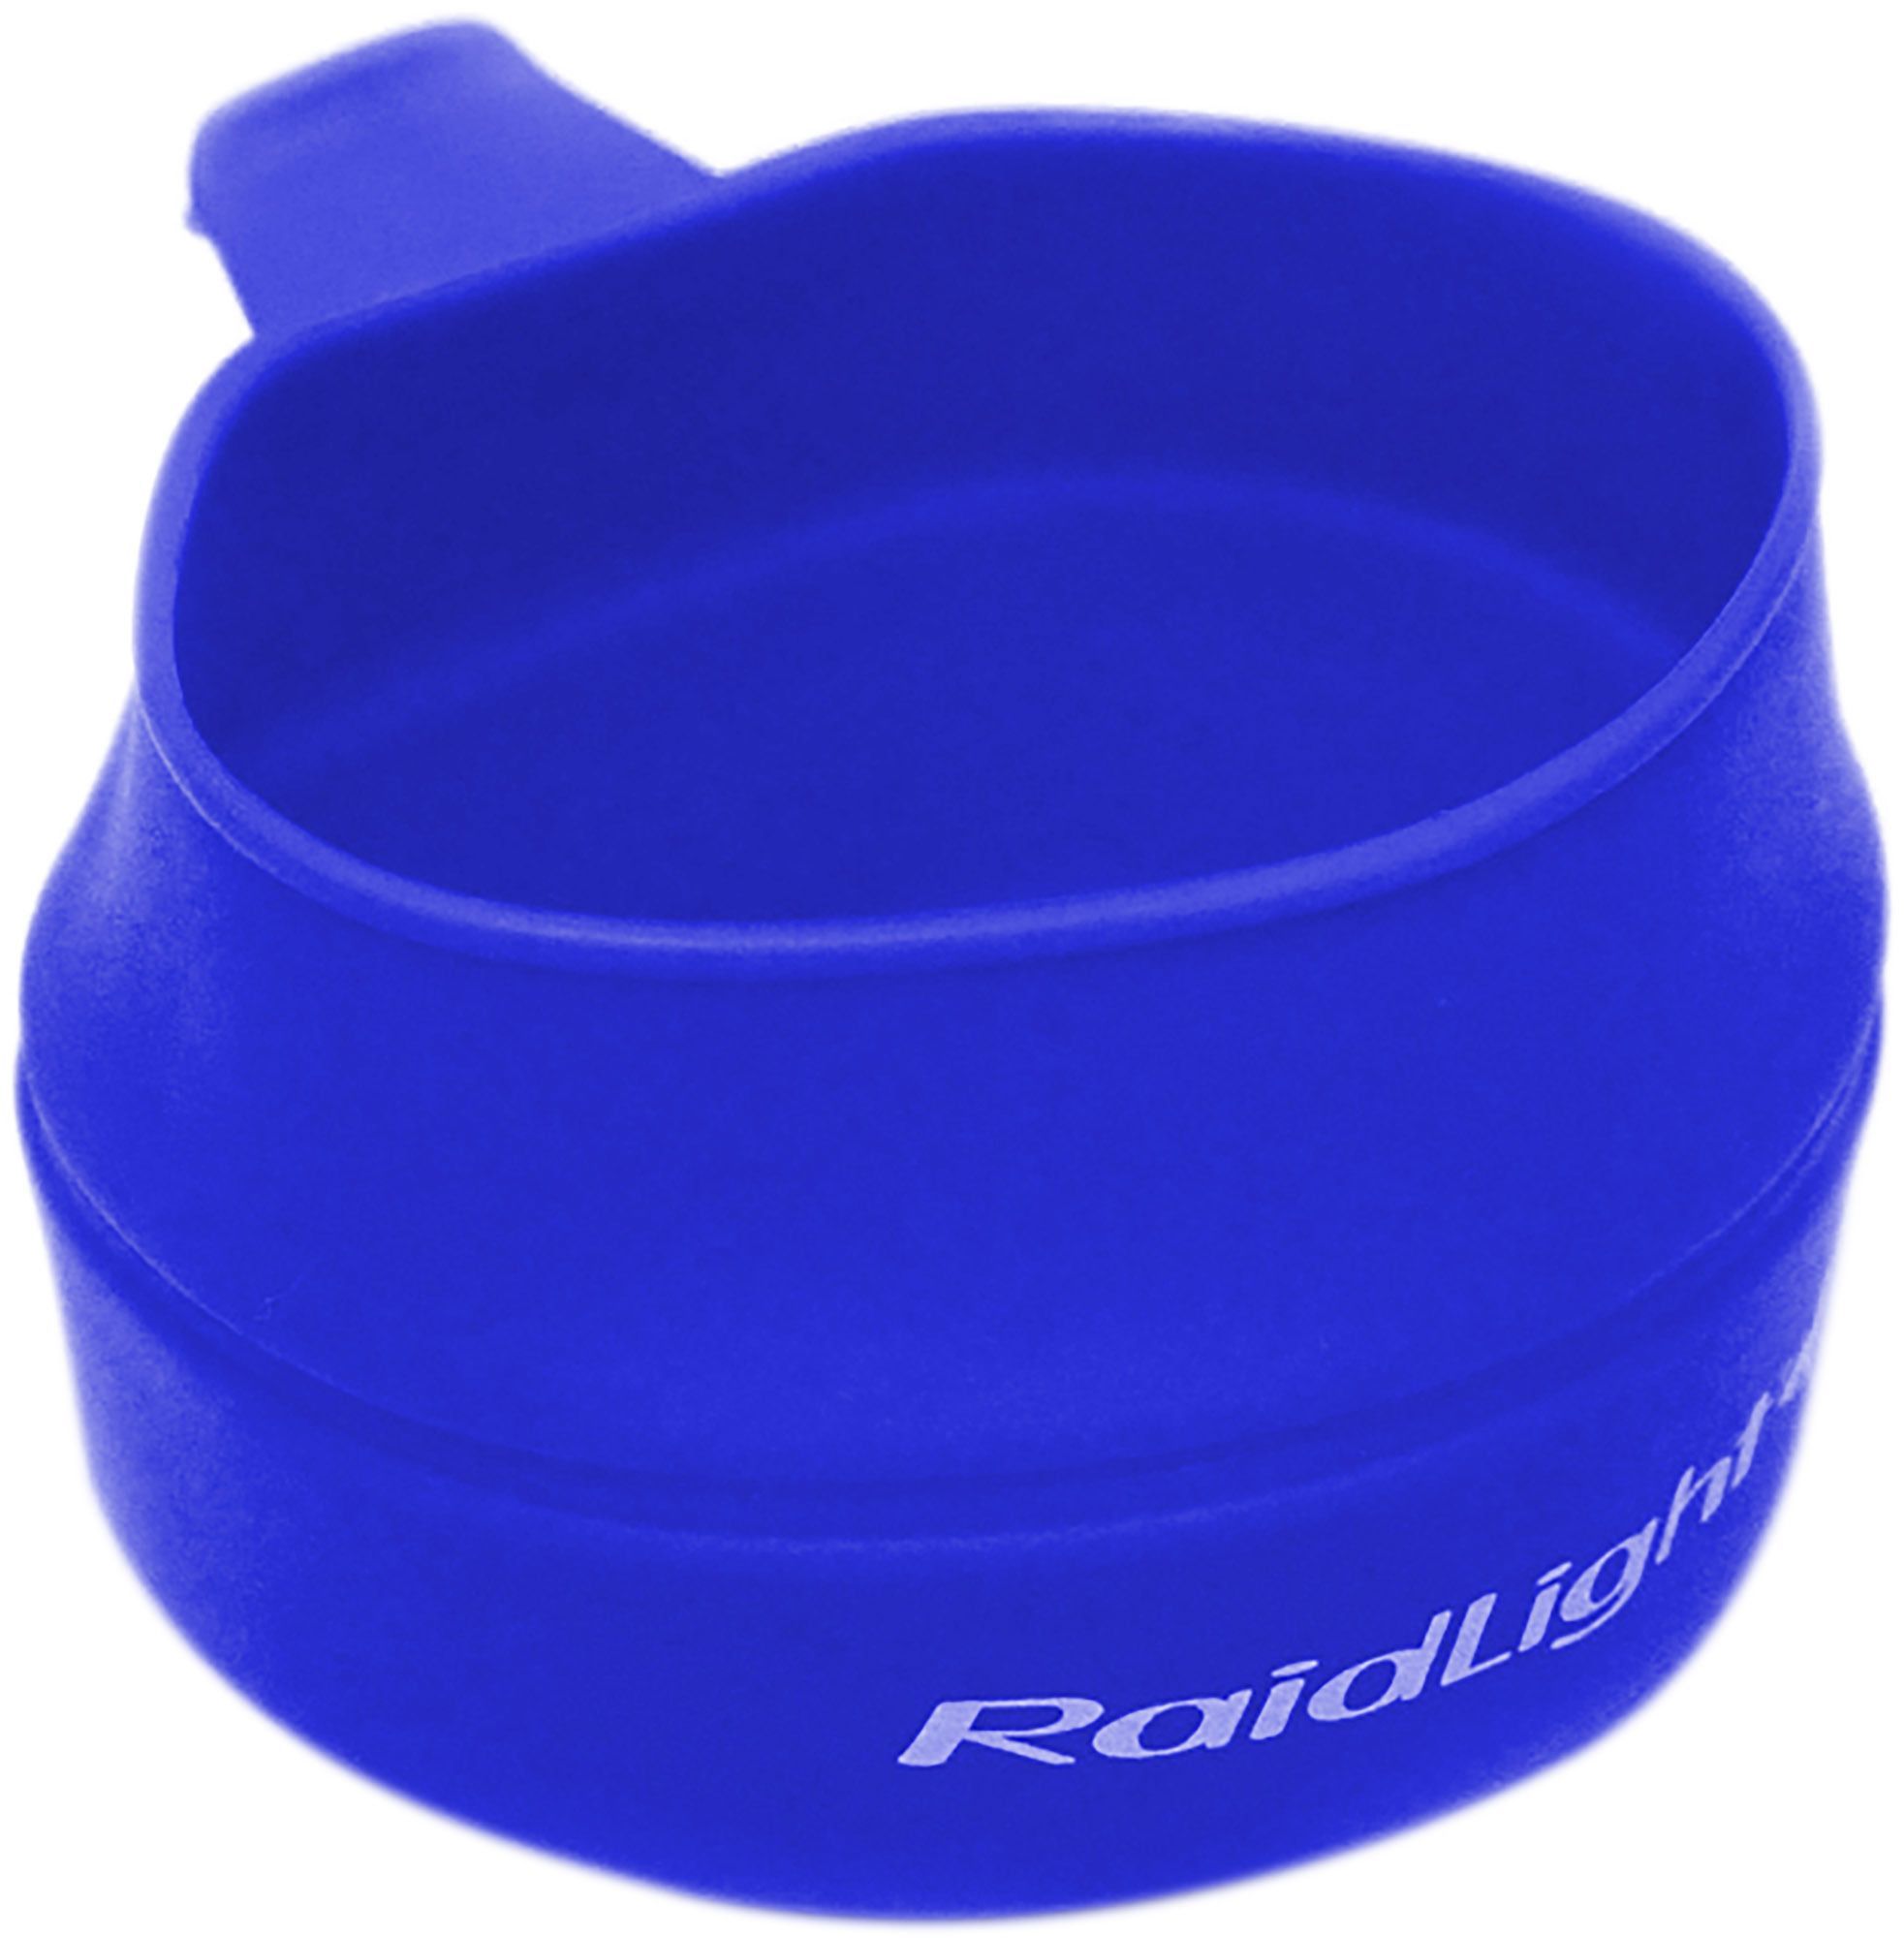 Folding Eco Cup - Rouge